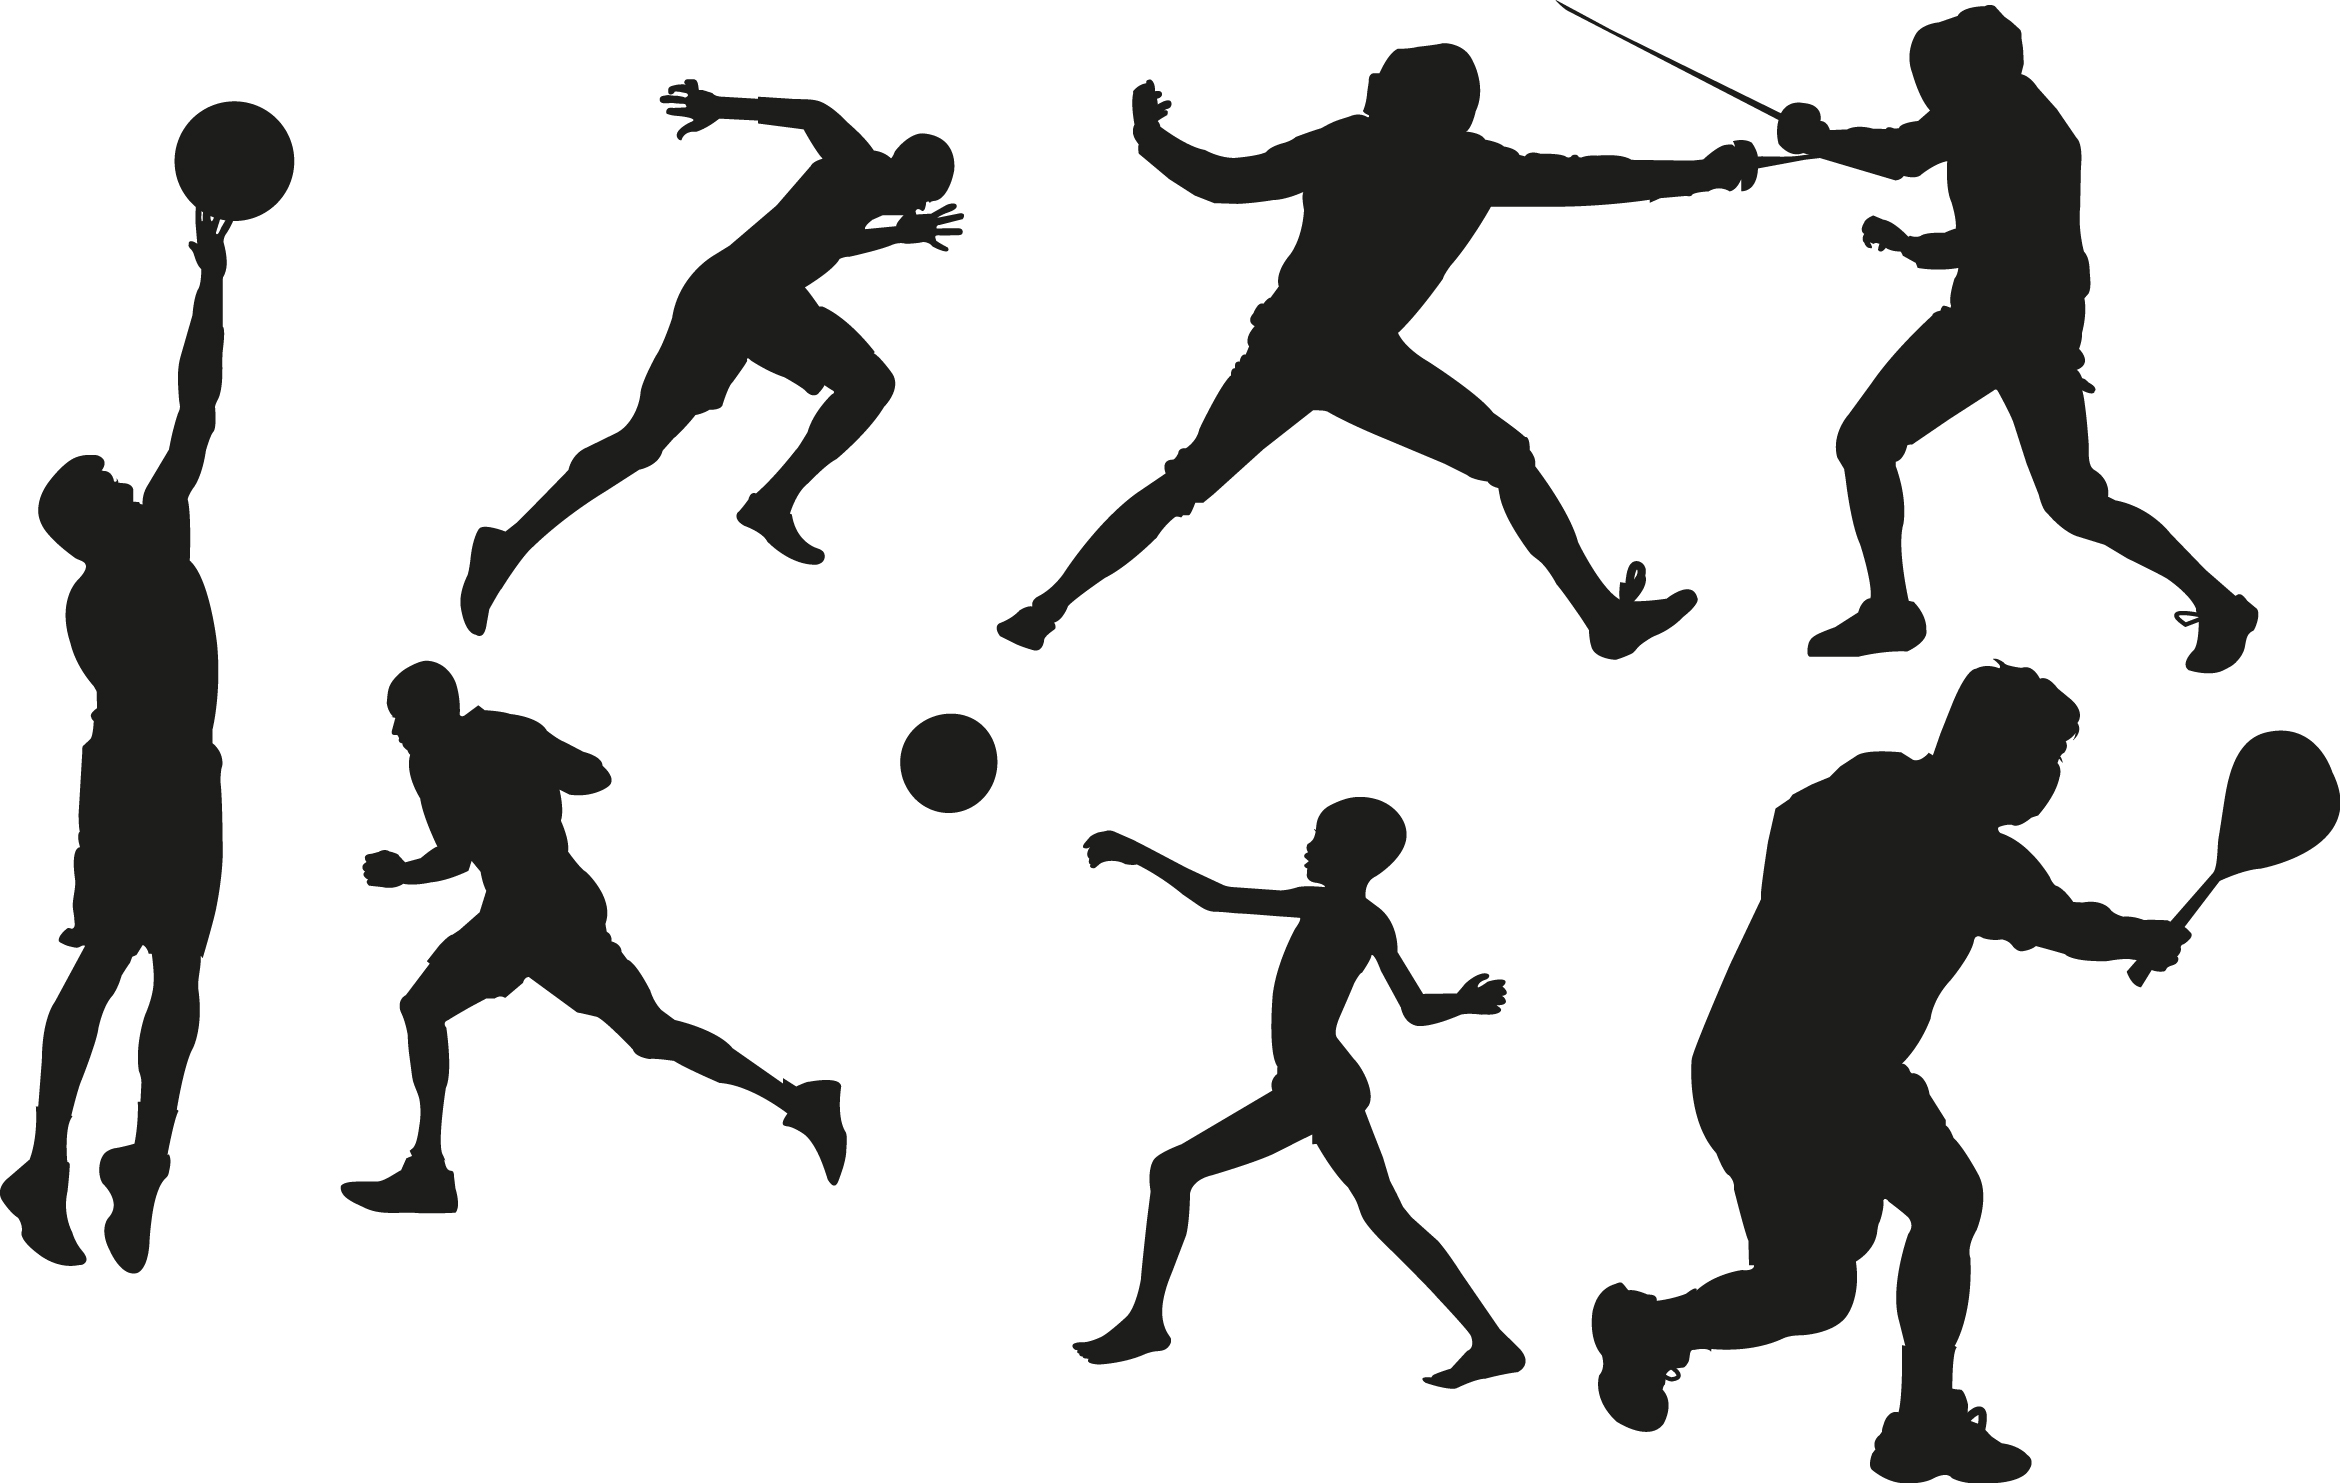 Sports Silhouette Clip Art Professional sports is my leisure